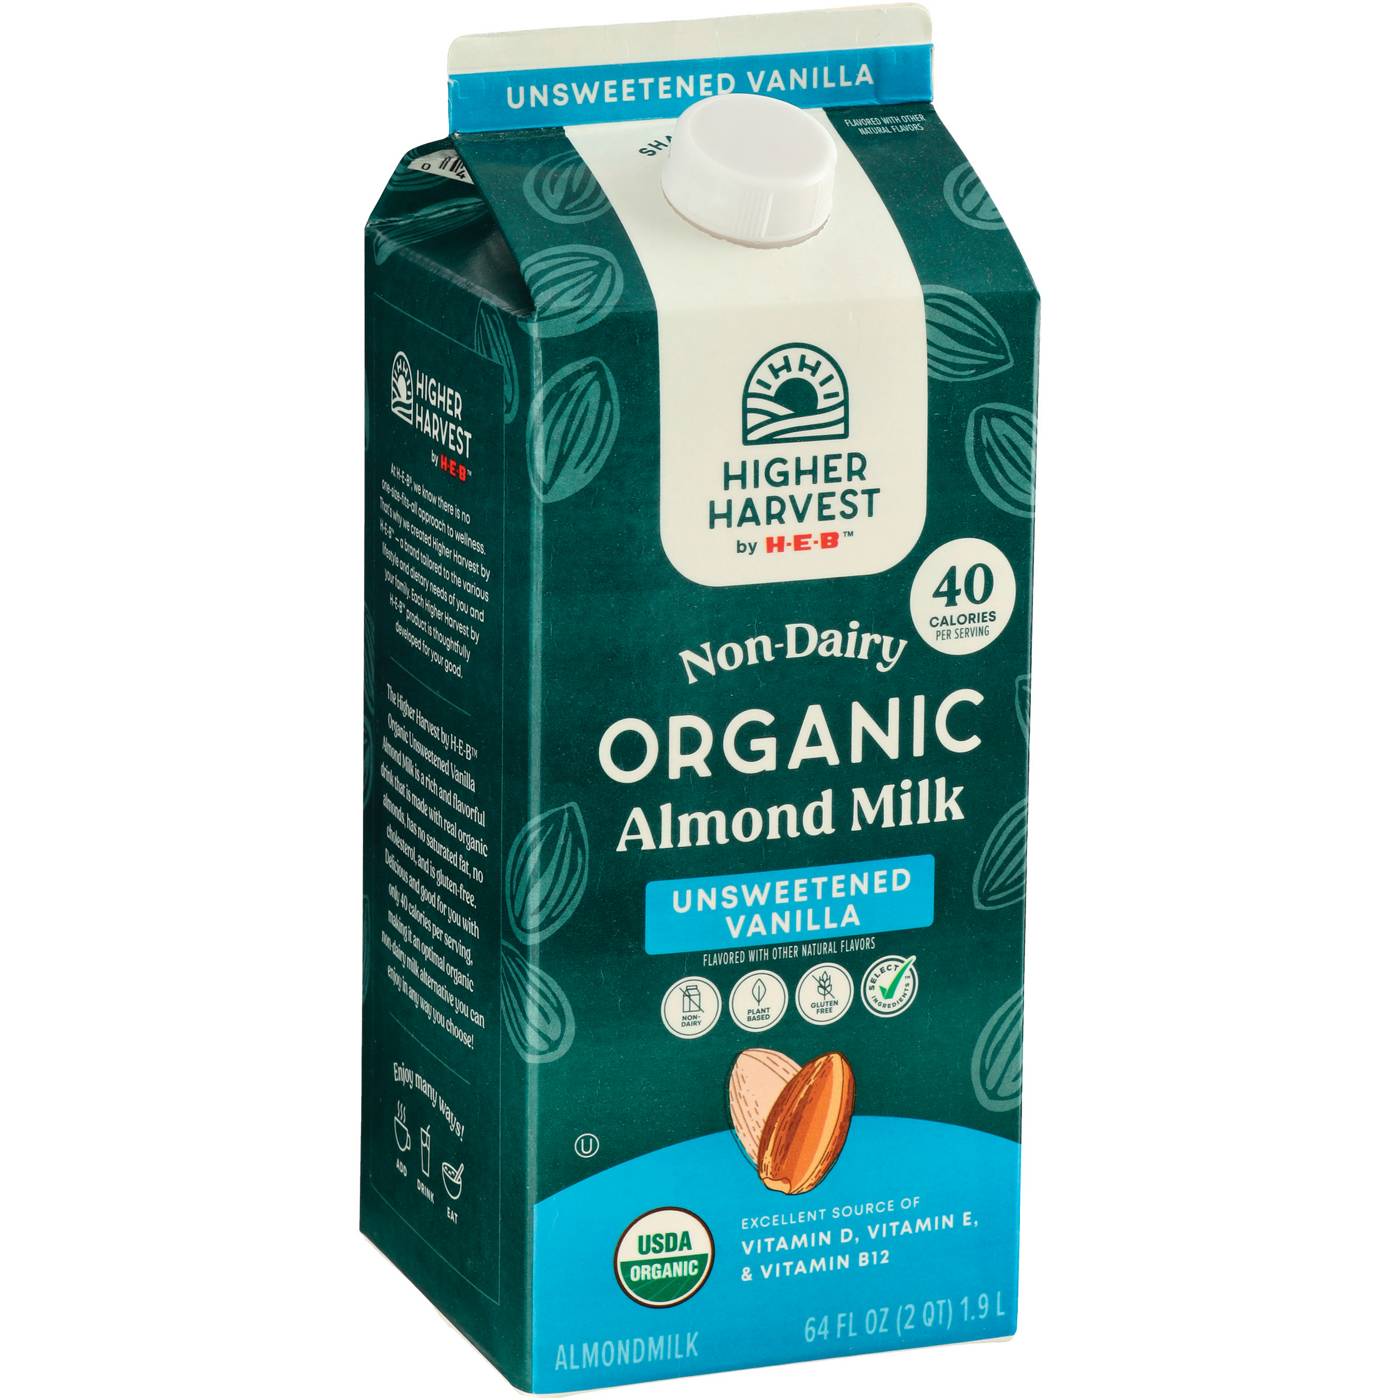 Higher Harvest by H-E-B Organic Non-Dairy Almond Milk – Unsweetened Vanilla; image 2 of 2